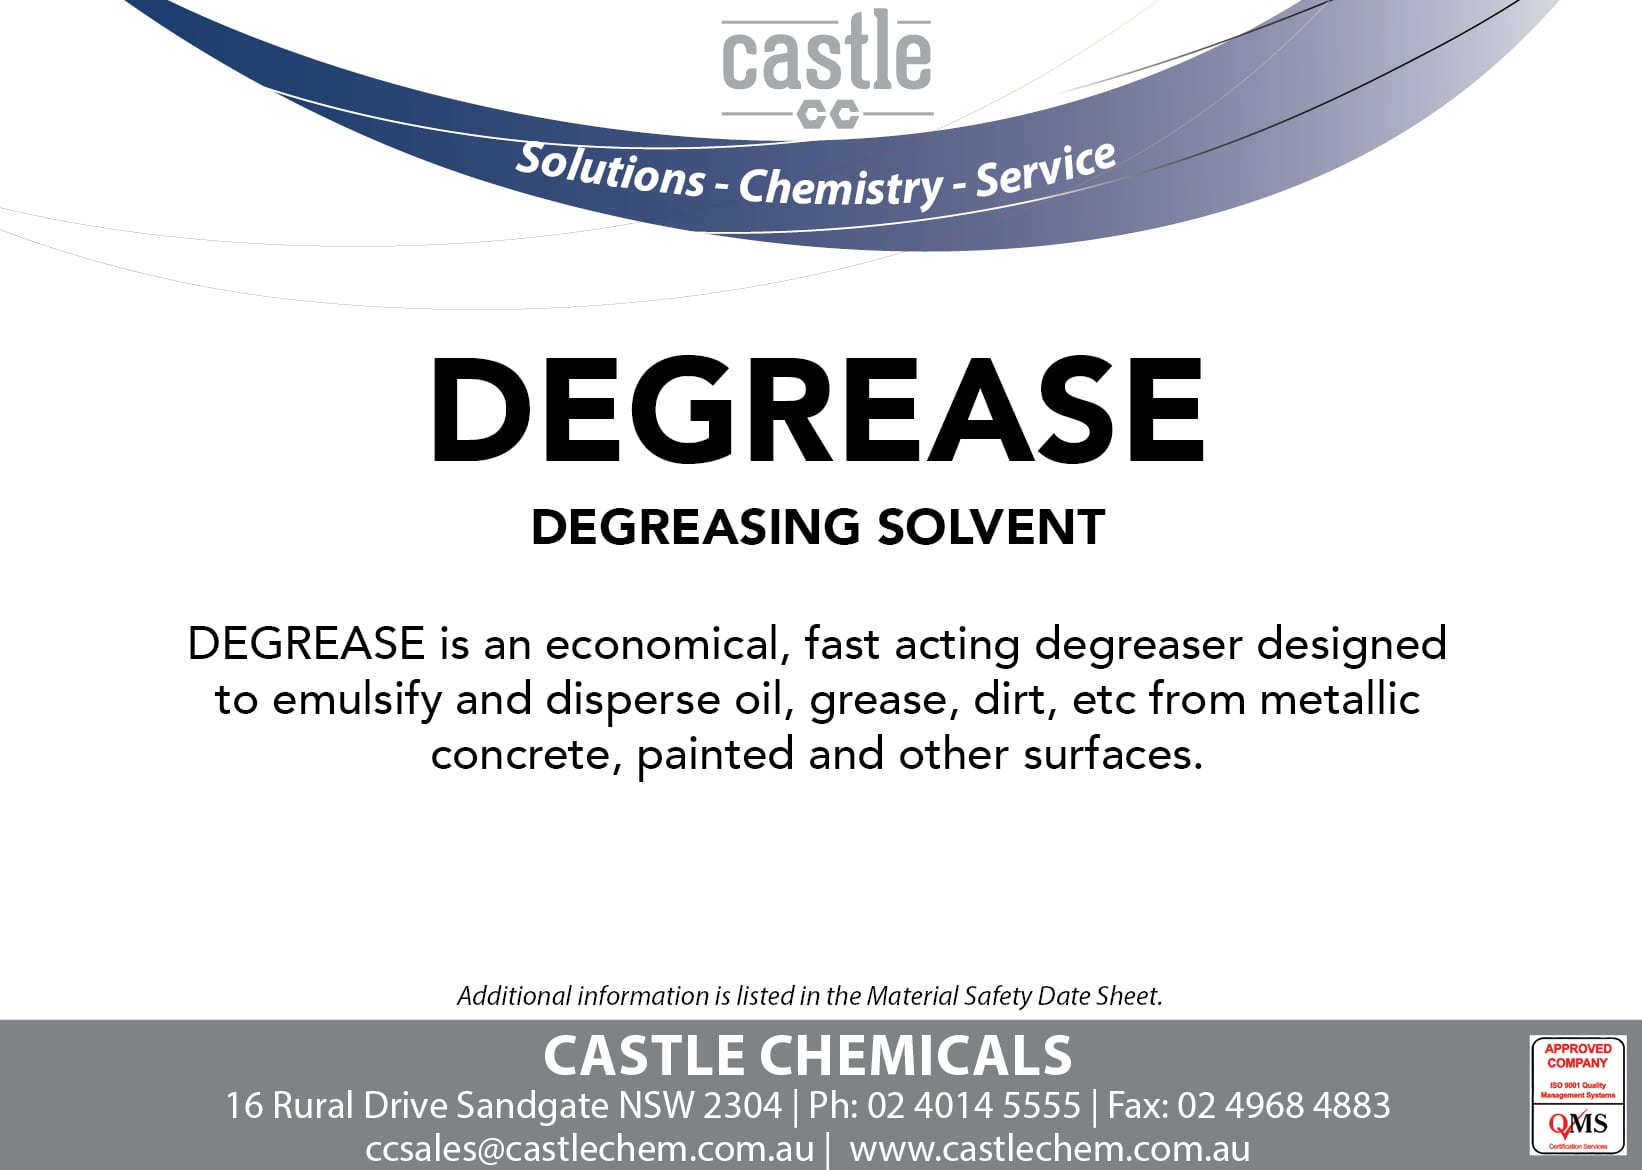 DEGREASE